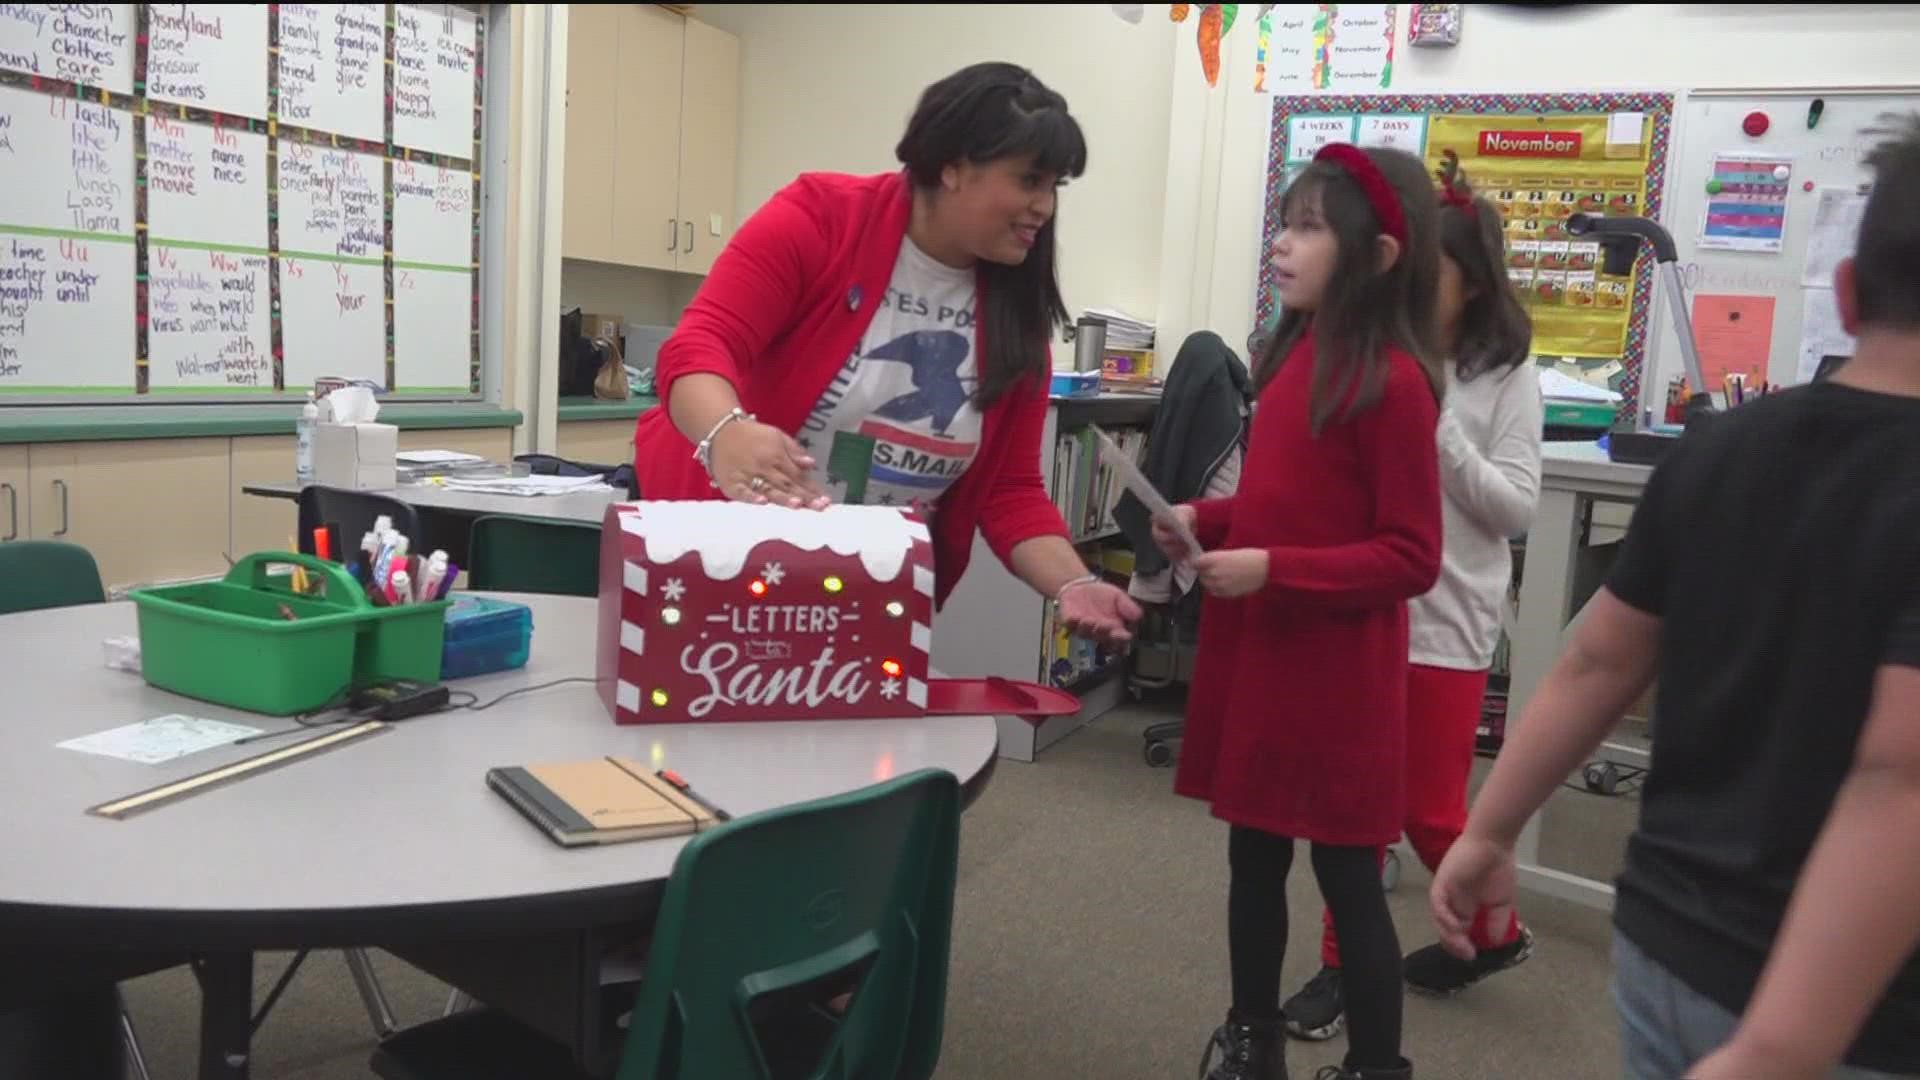 The U.S.P.S. has been doing Operation Santa for 100 years but this is the first year they've partnered with a school to help fulfill wishes for children in need.